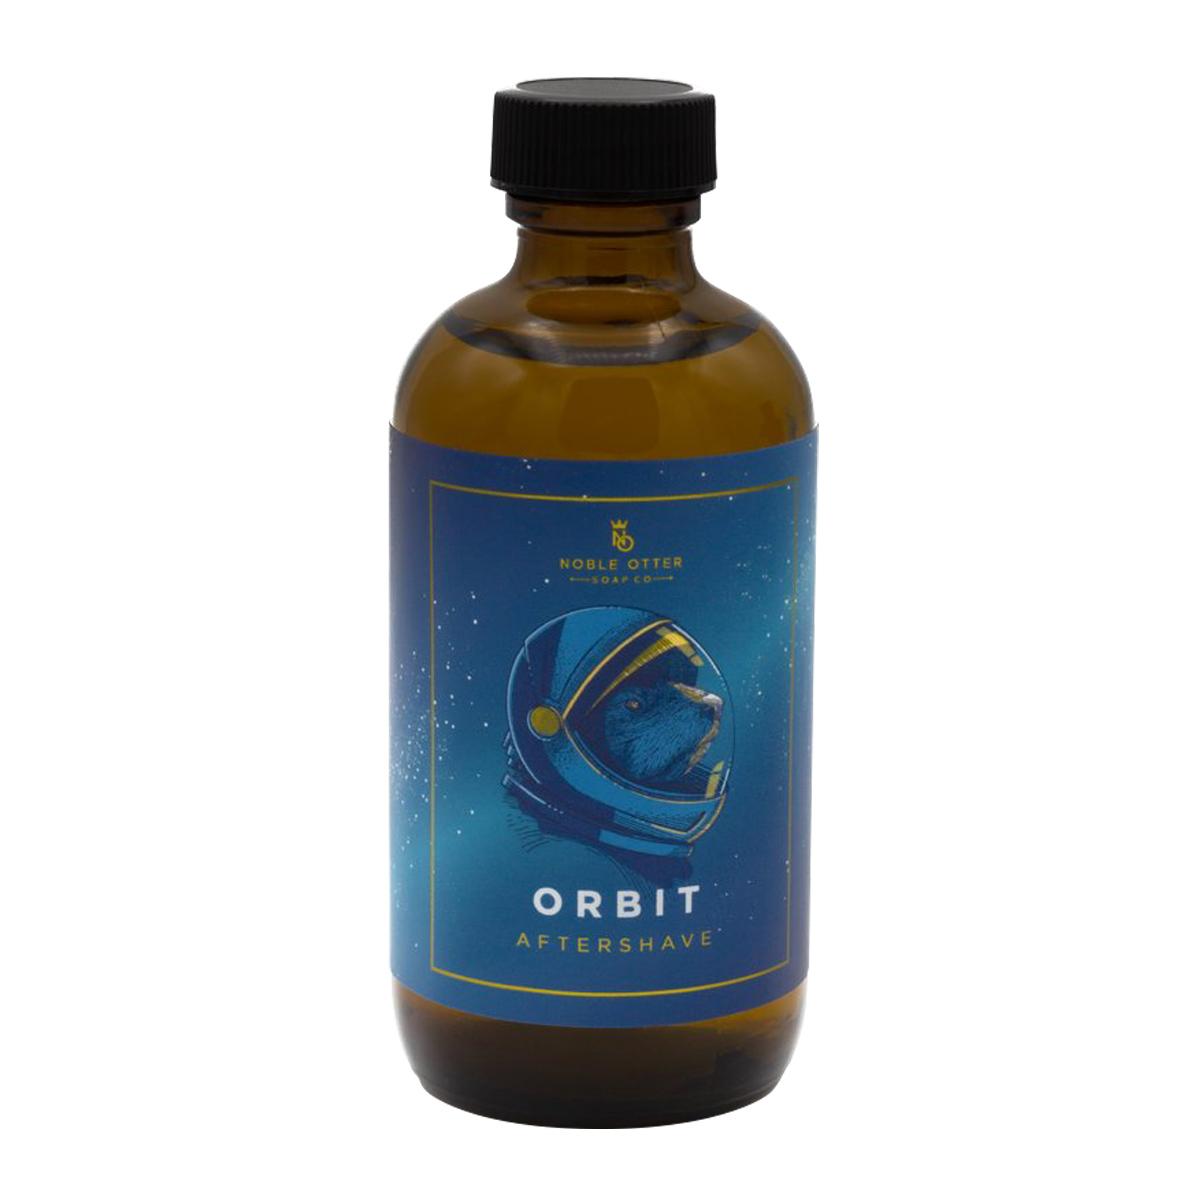 Primary image of Aftershave- Orbit